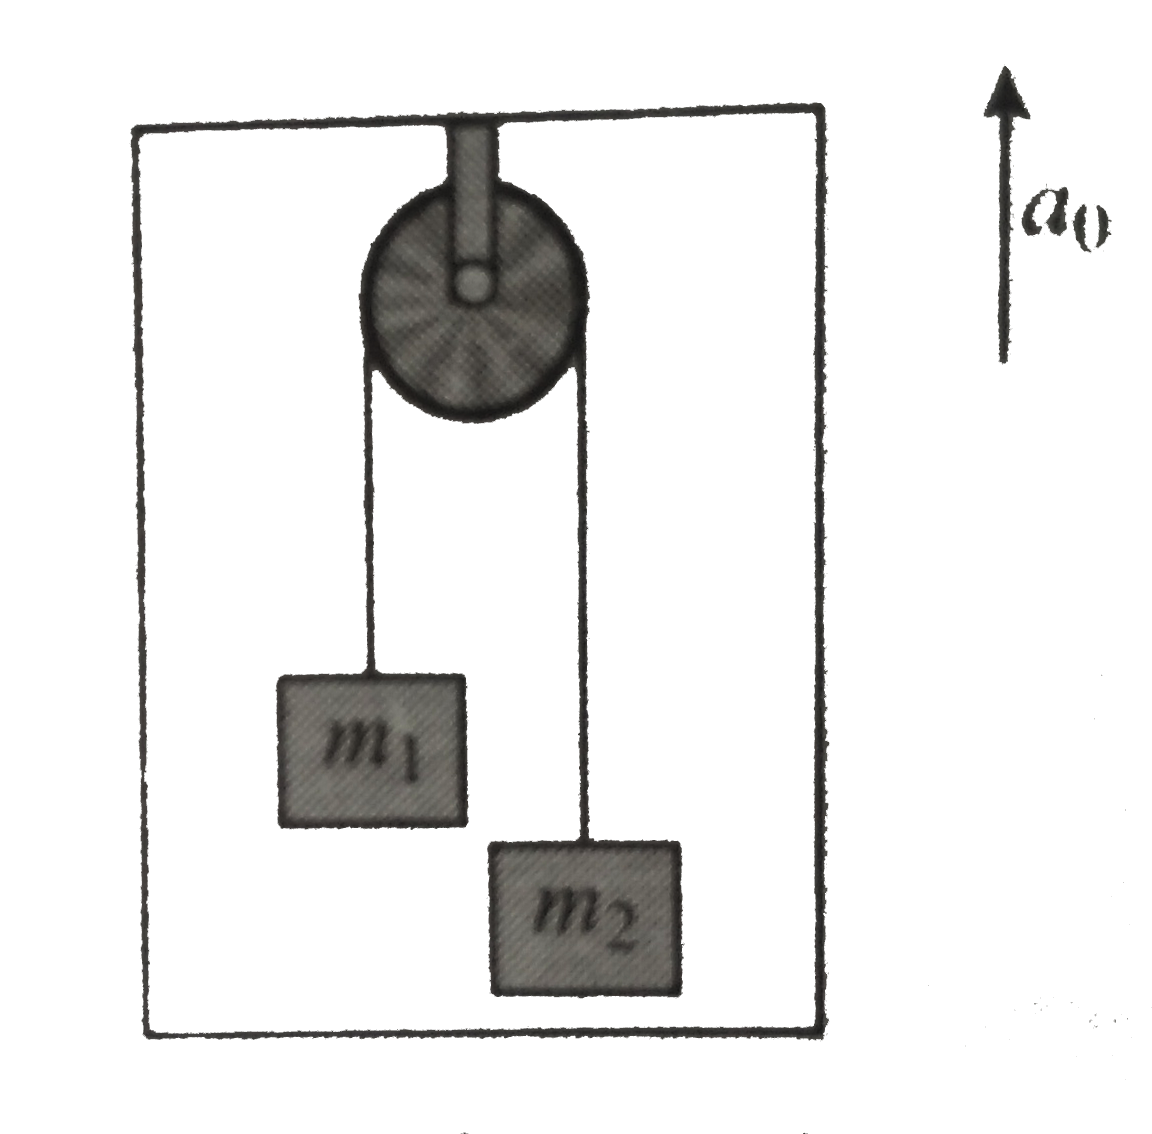 If the pulley is massles and moves with an upward acceleration a(0). Find the acceleration of (m1)and (m2) w.r.t to elevator.